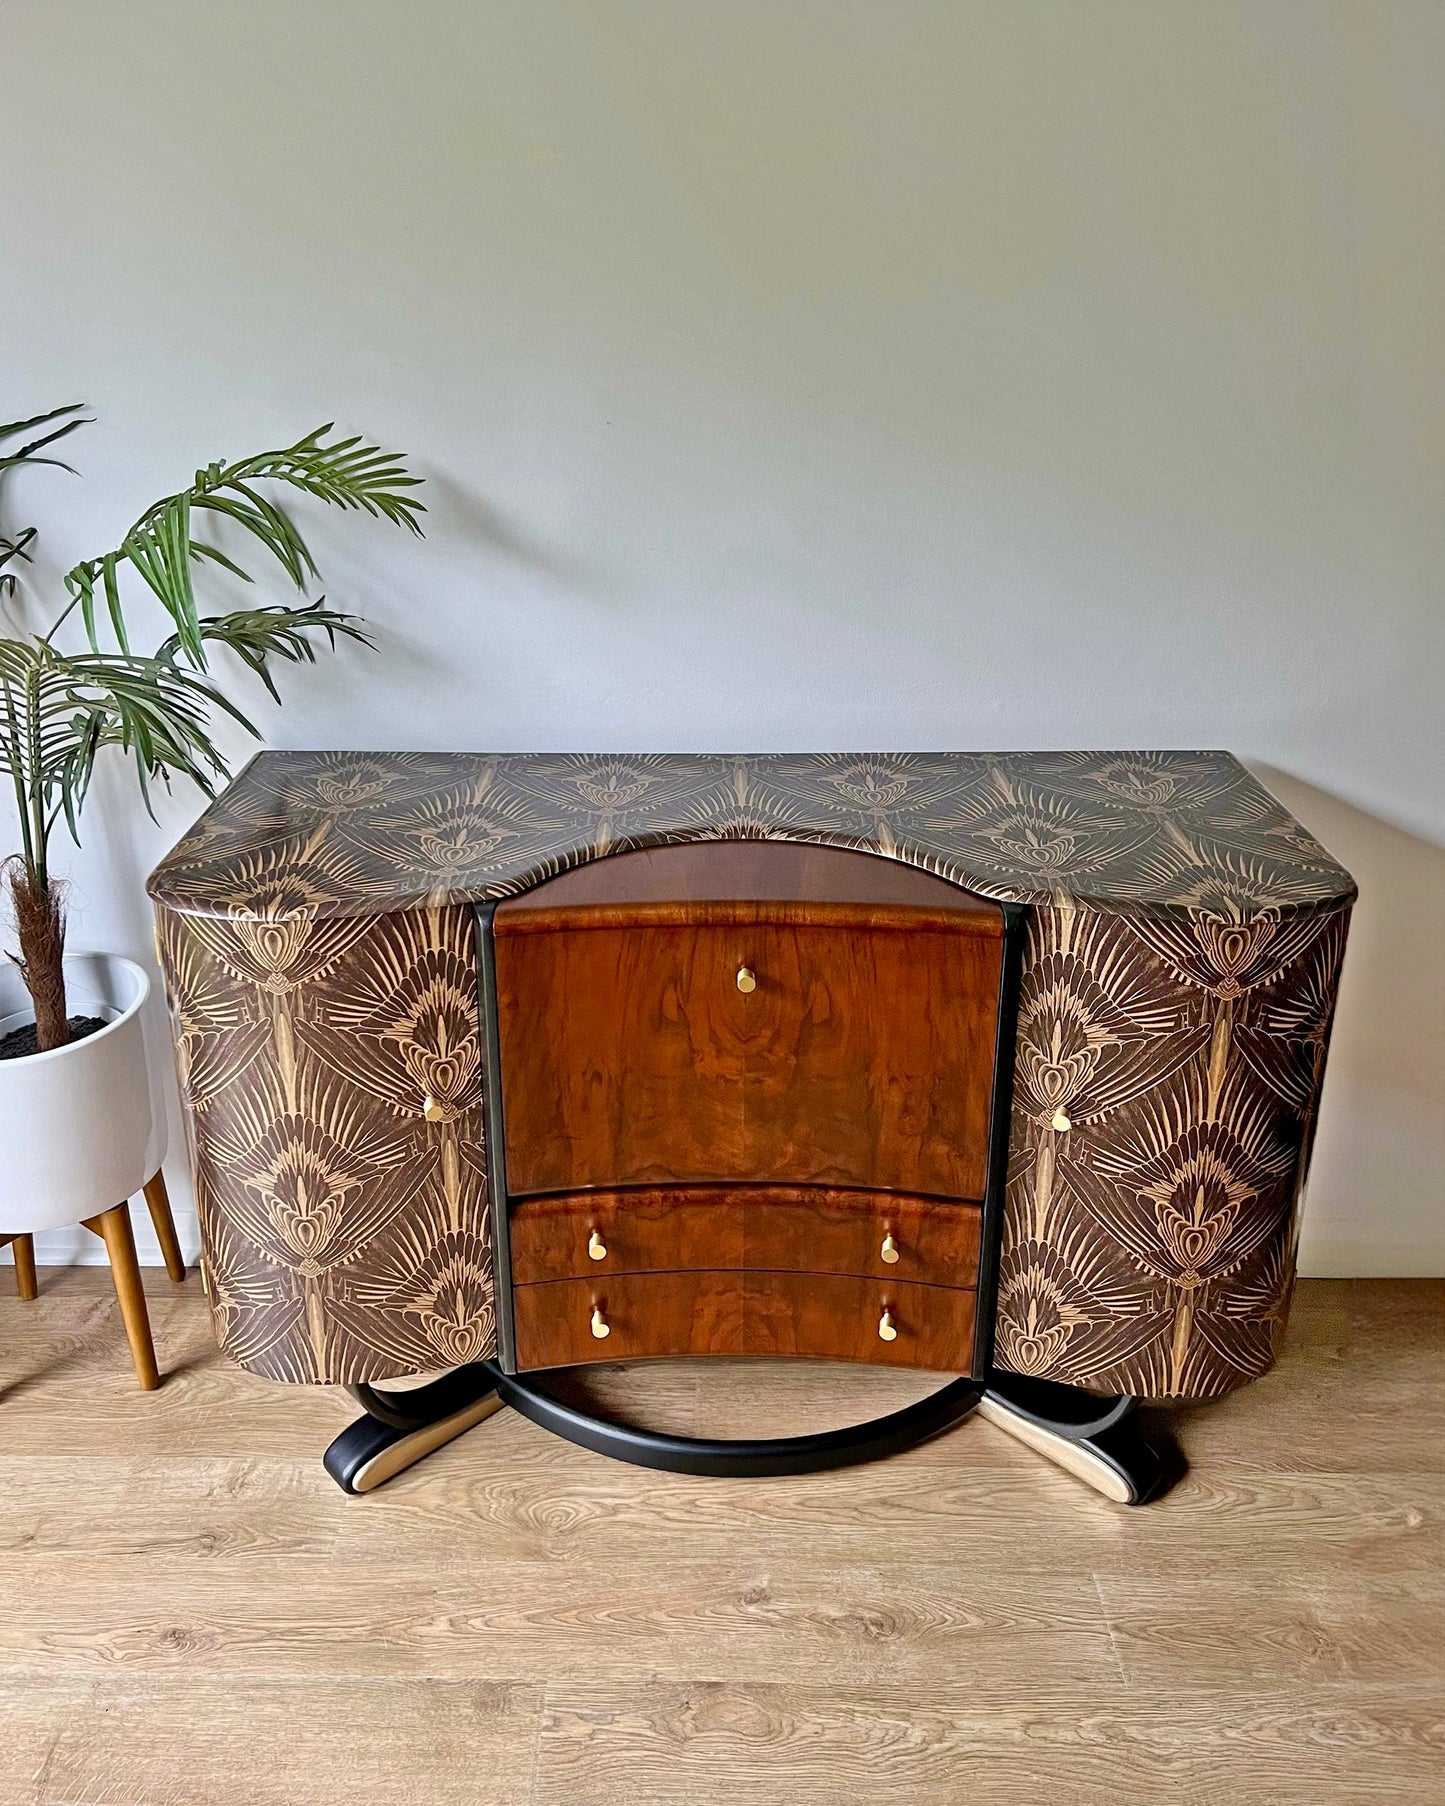 Art Deco Beautility Walnut Cocktail Cabinet with Black & Gold Decadent Design